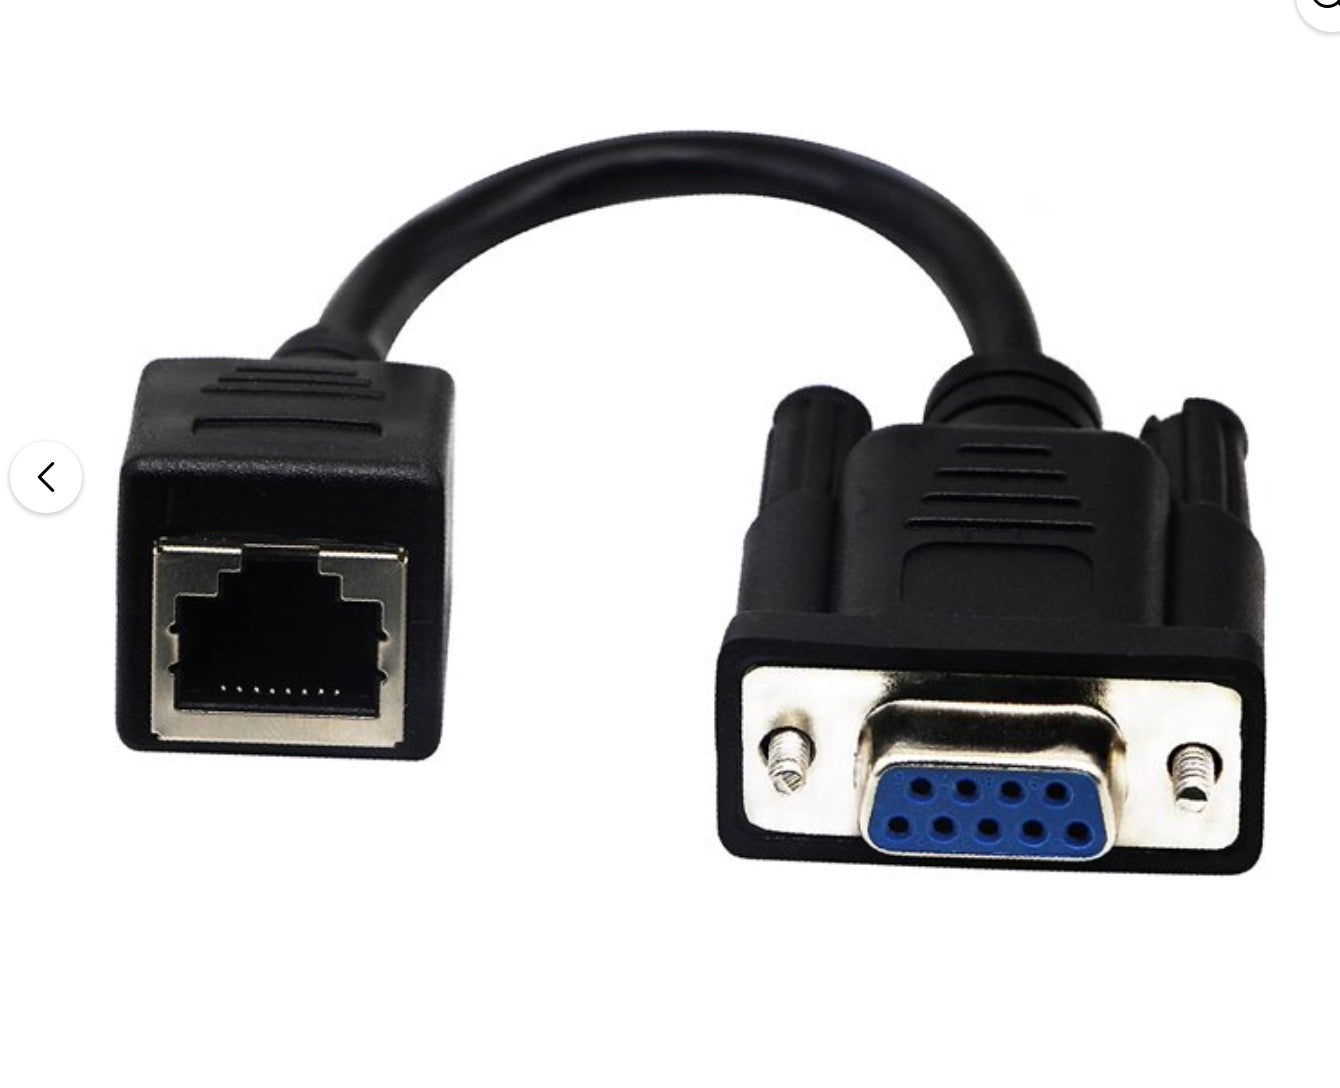 DB9 to RJ45 Serial Adapter, DB9 9-Pin Serial Female to RJ45 Female Cat5/6 Ethernet LAN Console Extender Cable